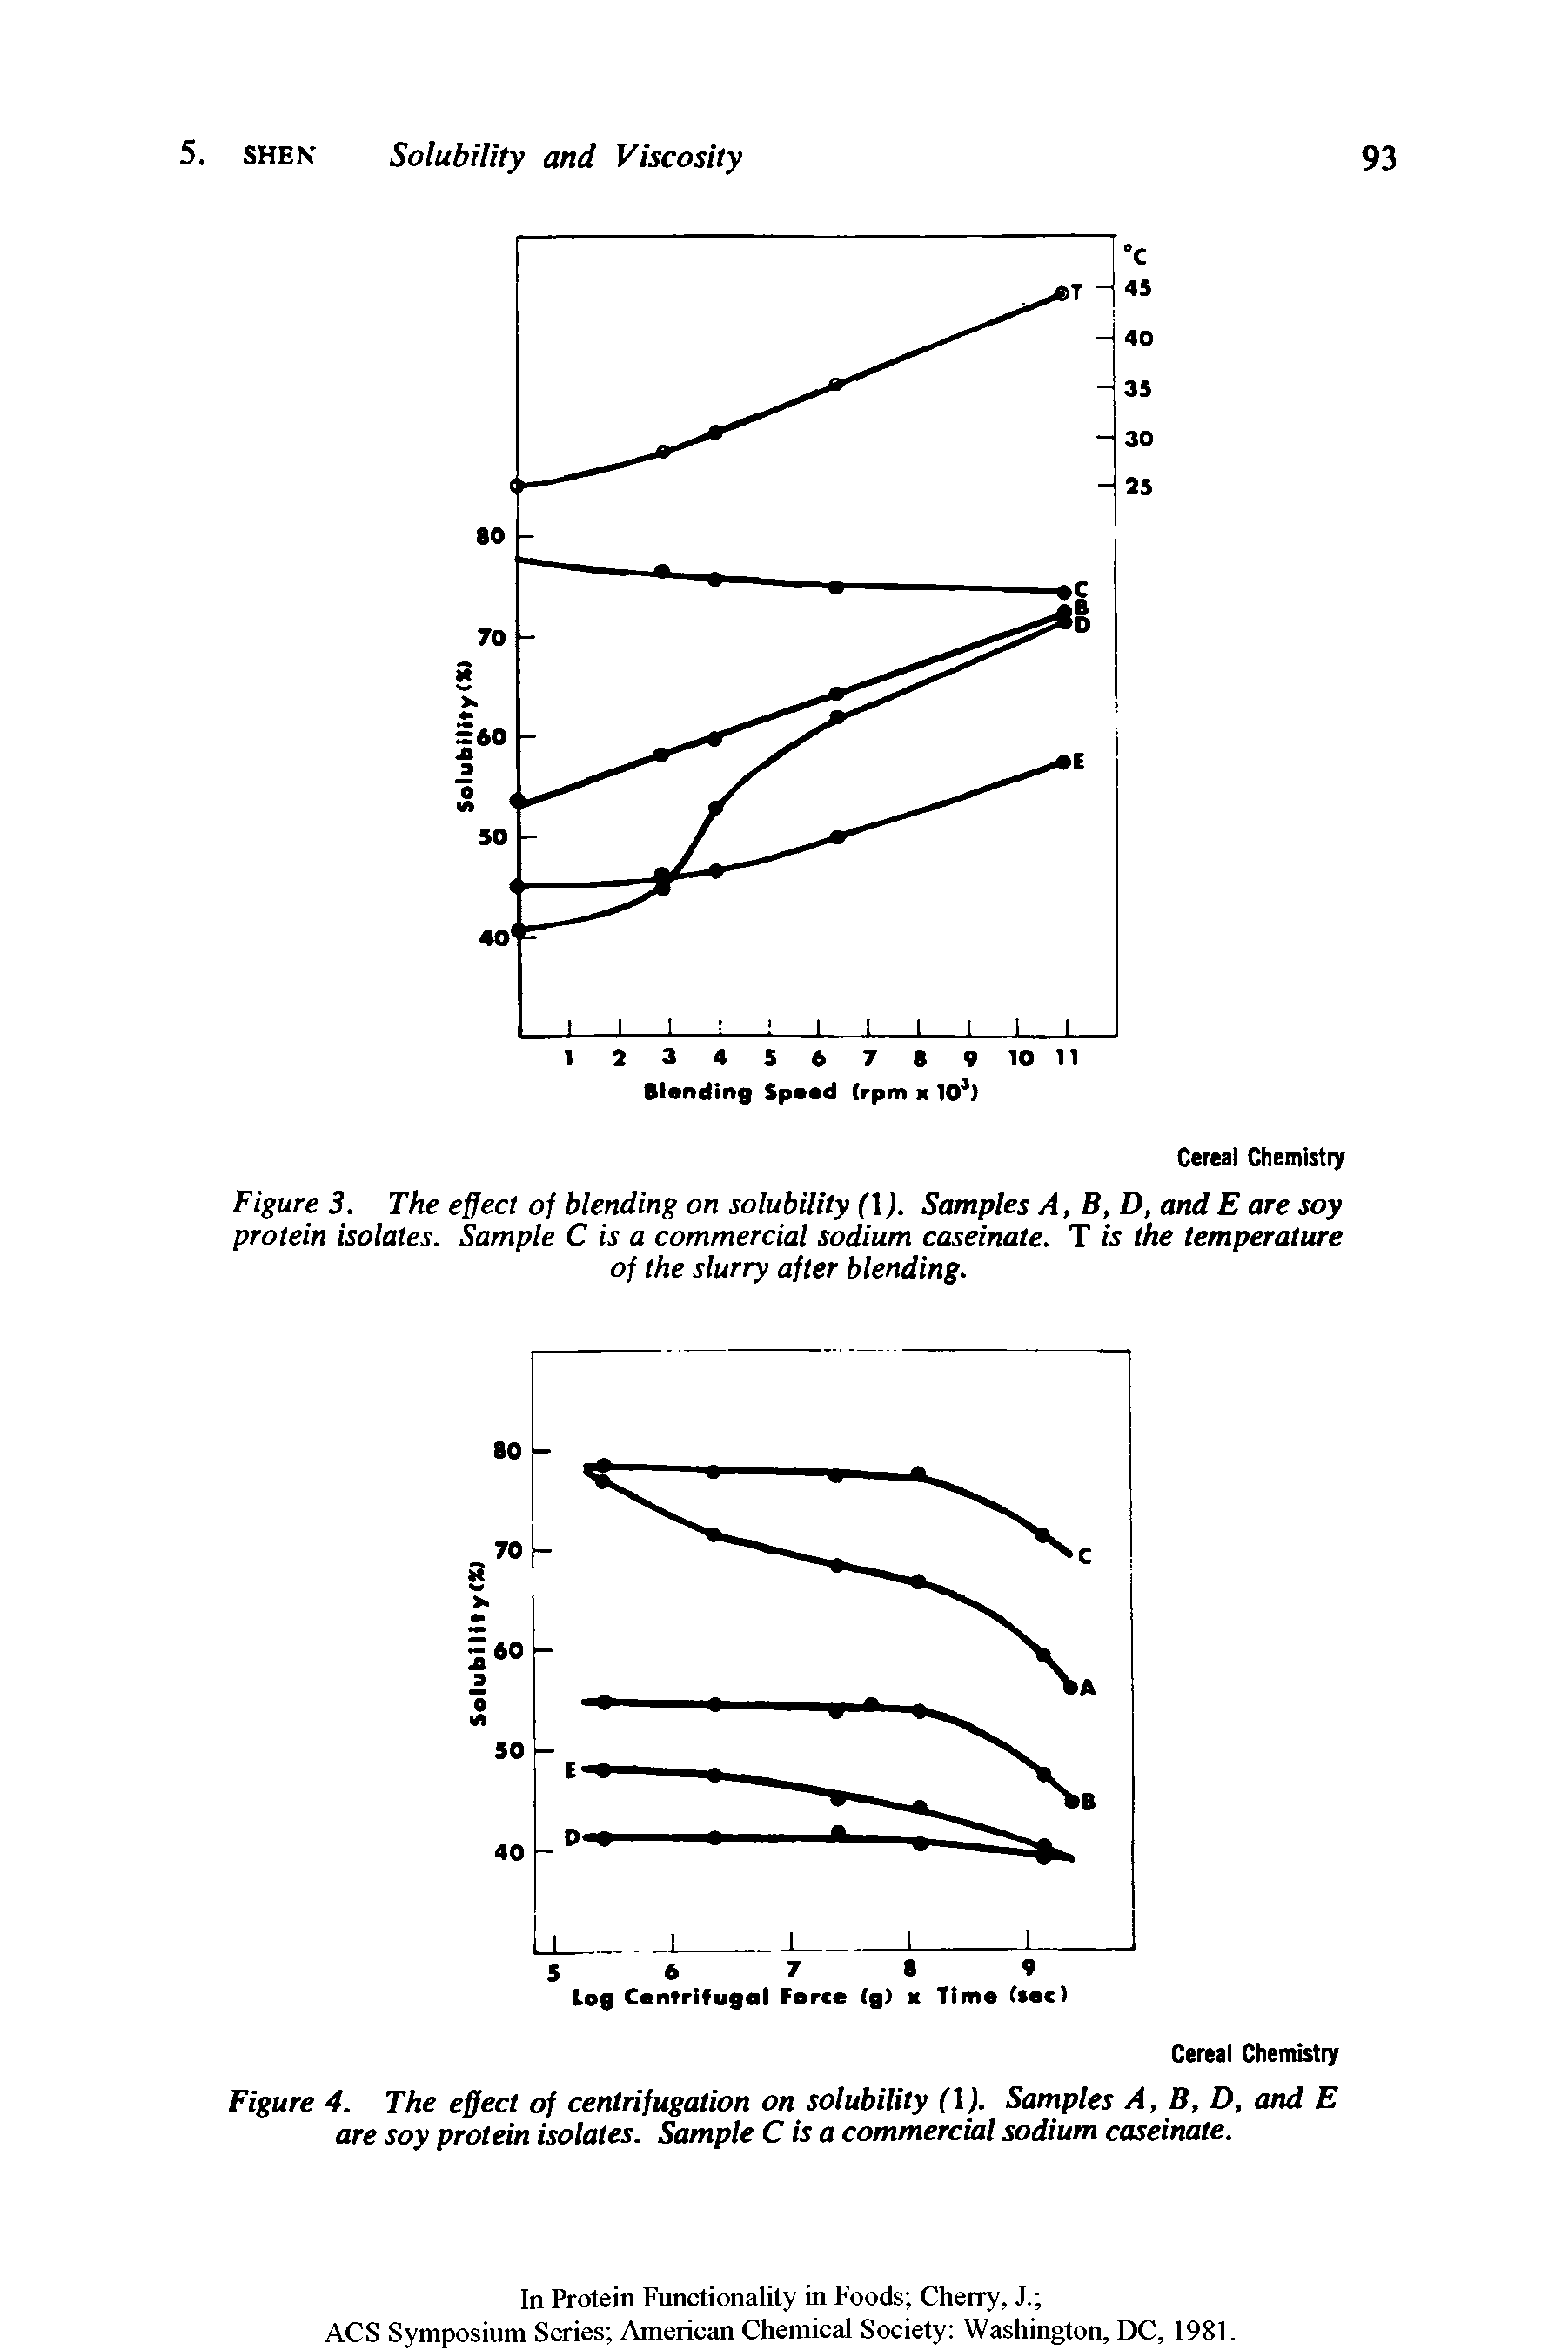 Figure 3. The effect of blending on solubility (I). Samples A, B, D, and E are soy protein isolates. Sample C is a commercial sodium caseinate. T is the temperature of the slurry after blending.